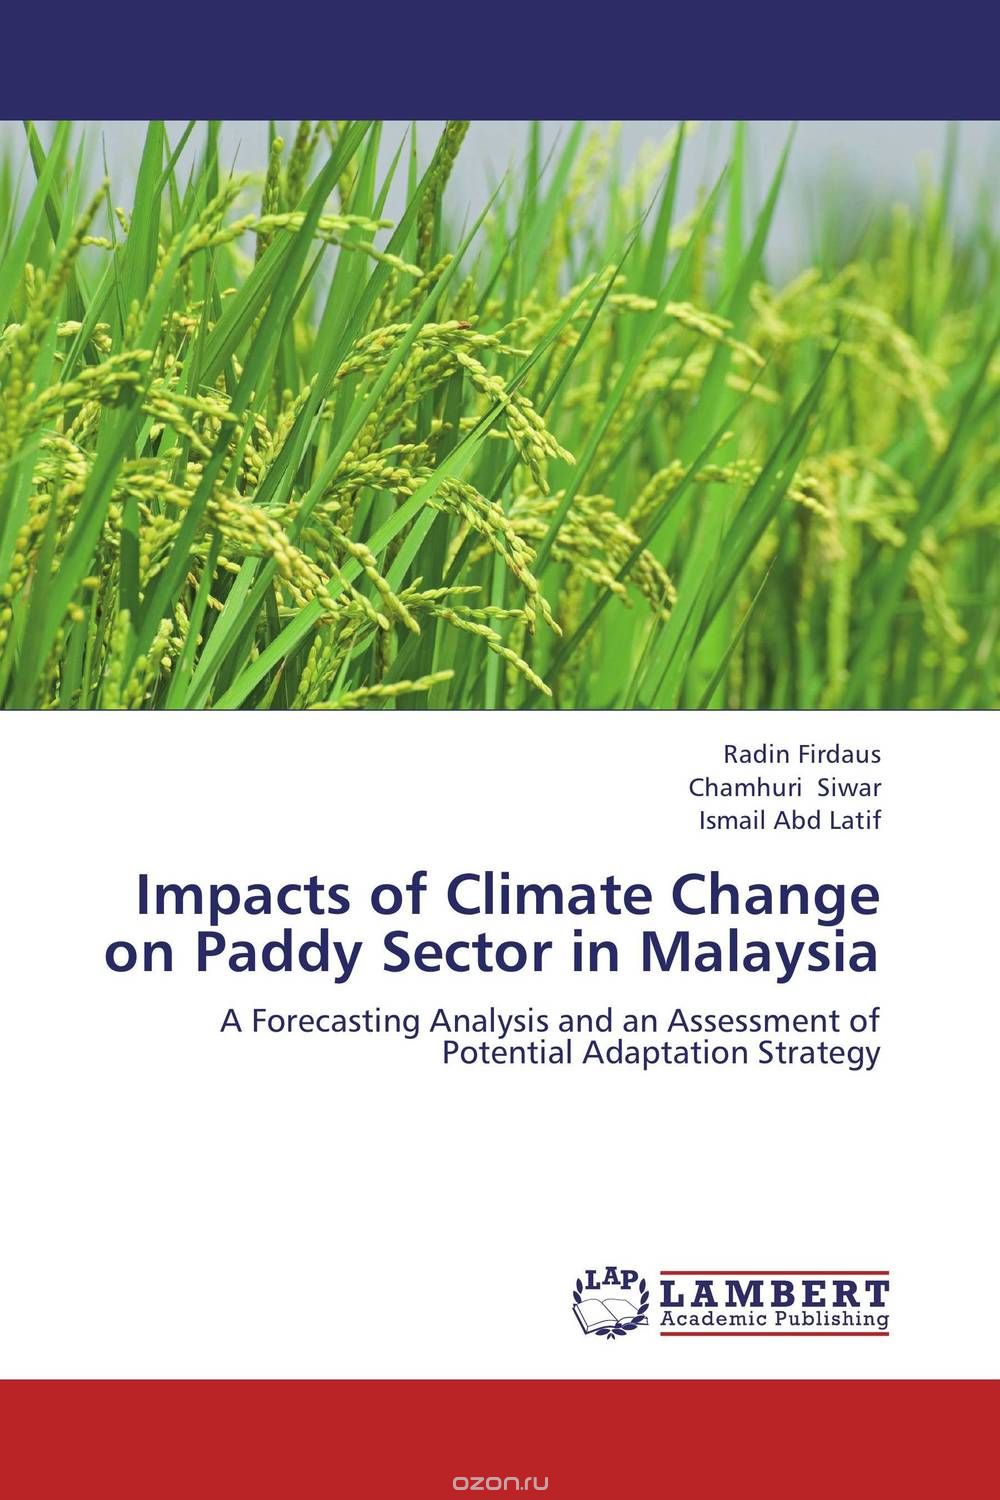 Impacts of Climate Change on Paddy Sector in Malaysia